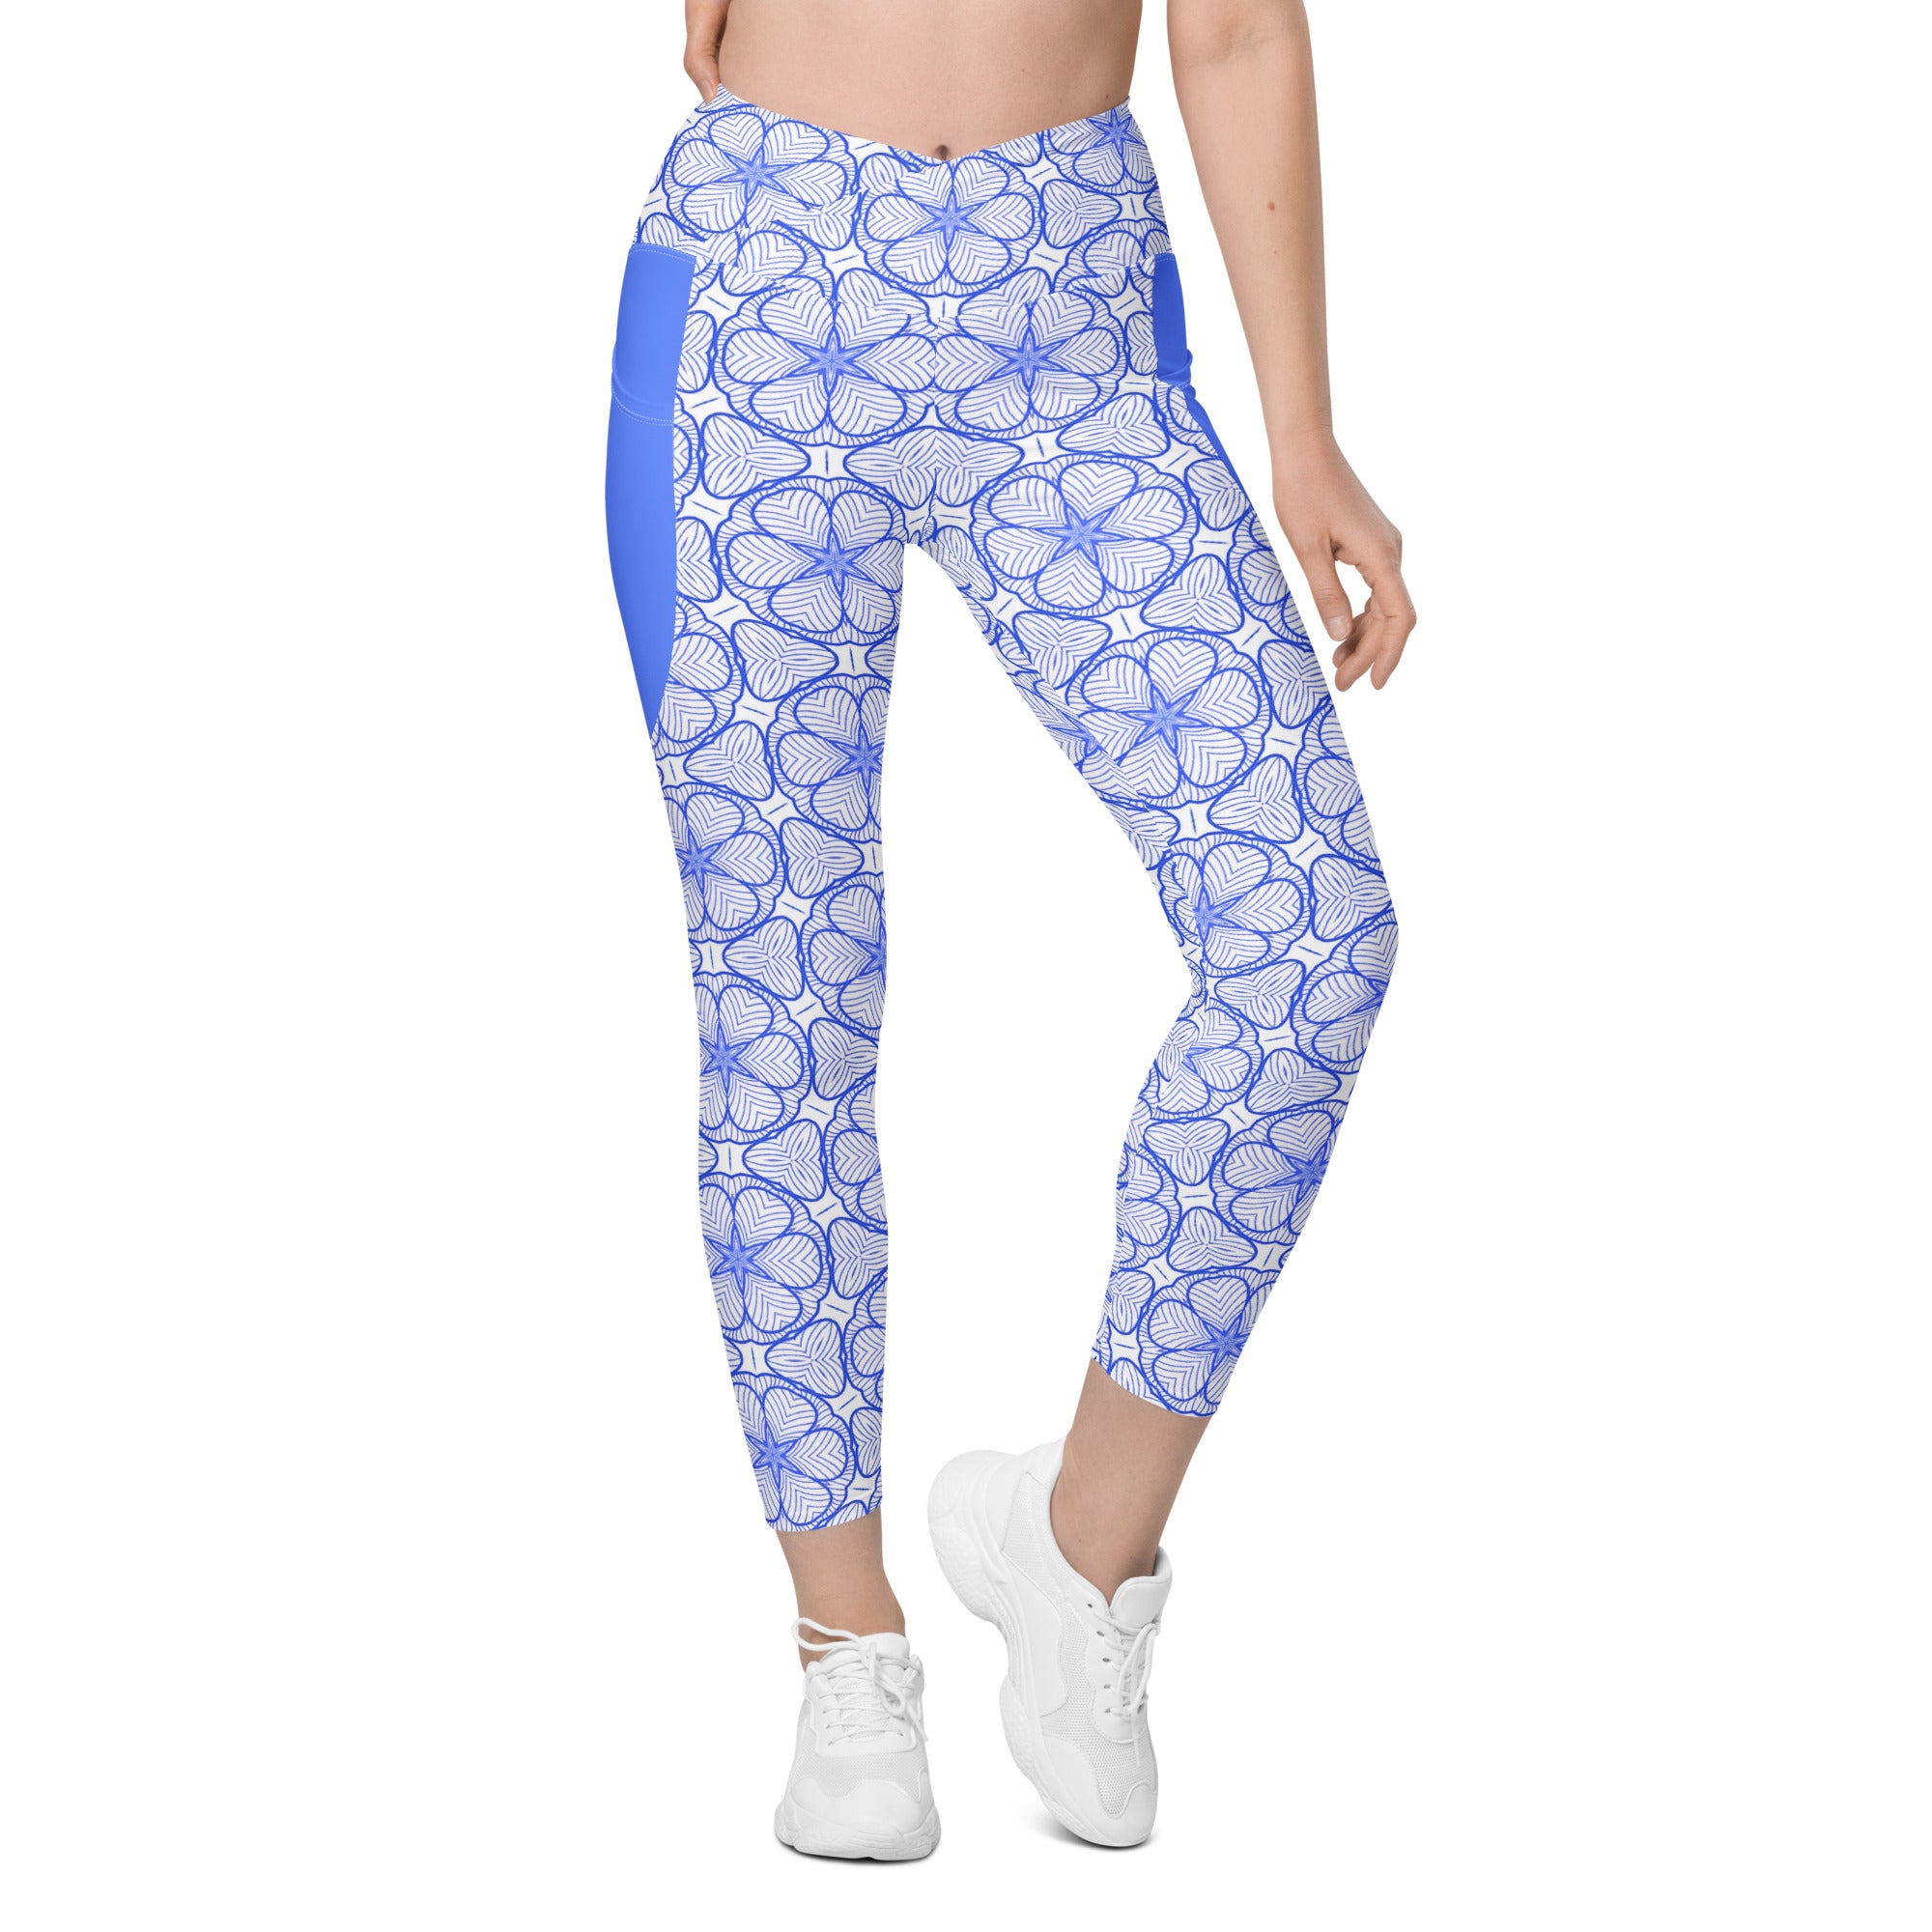 Tribal-patterned crossover leggings with side pockets.